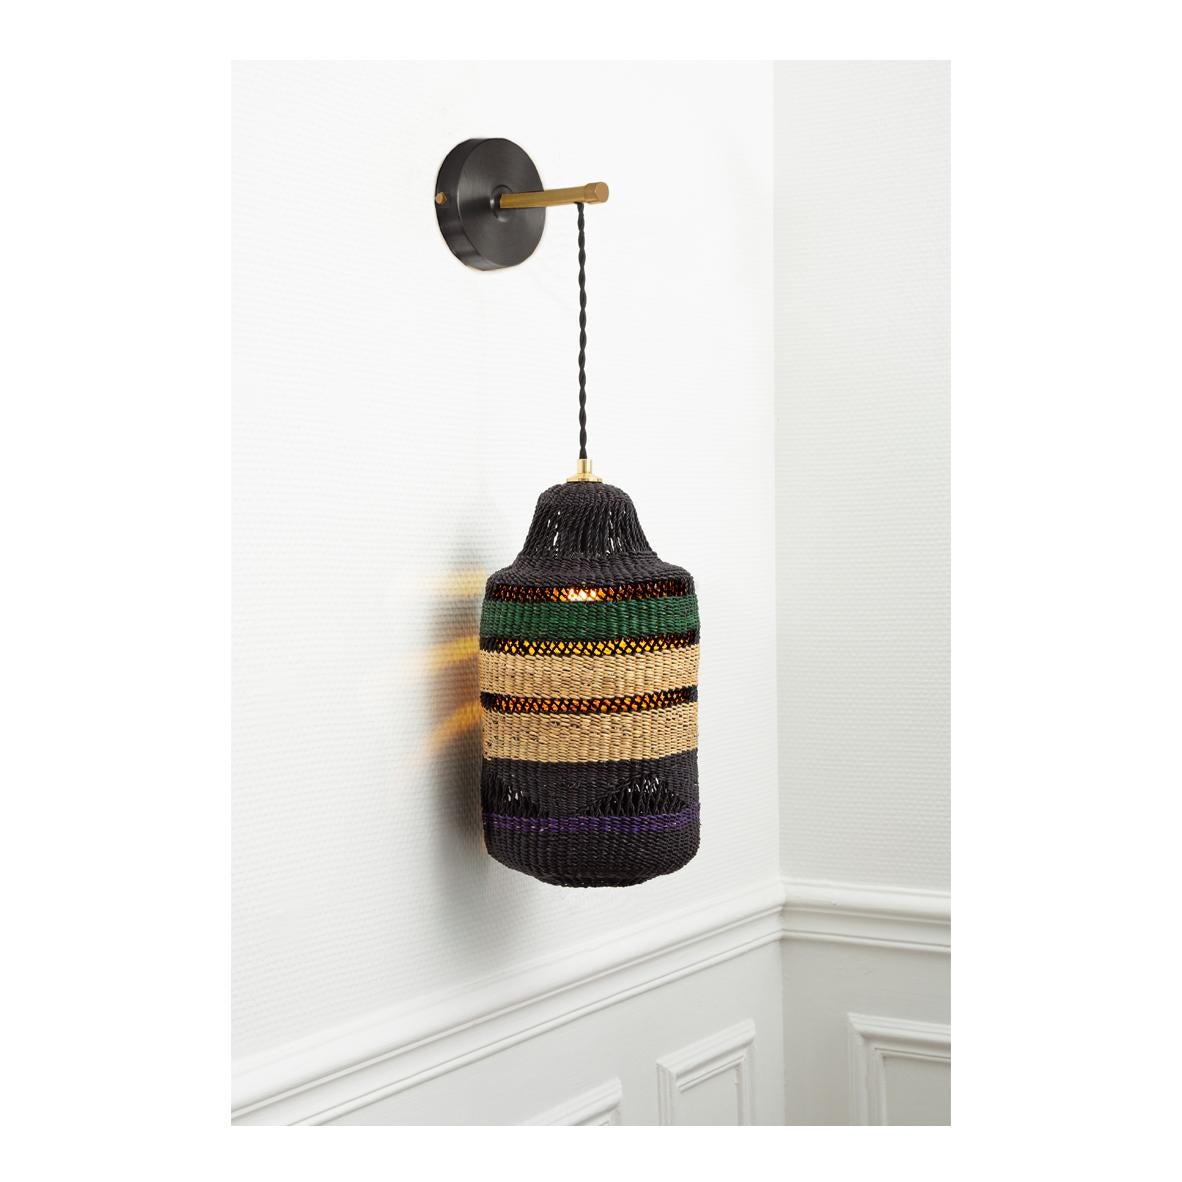 Wall lamp shadow : 
Gracefully woven 
Colour: Herb (bottle green) / Violet

Are you seeking an elegant surprise in your home? This pendant wall lantern can fill your room with mysterious patterns and light it has a lace like structure punctuated